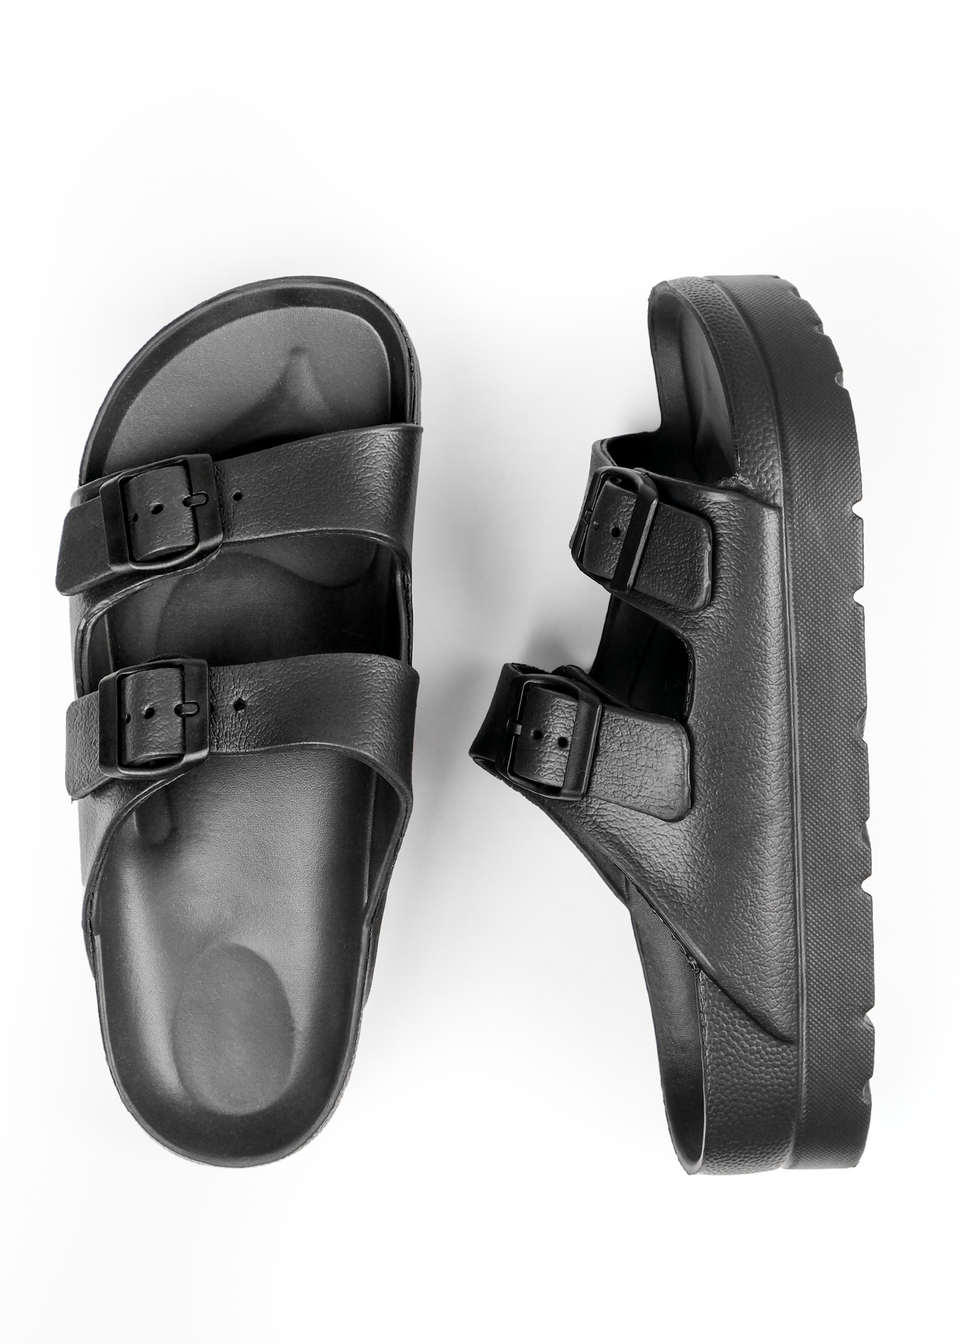 Where's That From Black Danielle Slider Sandals With Buckle